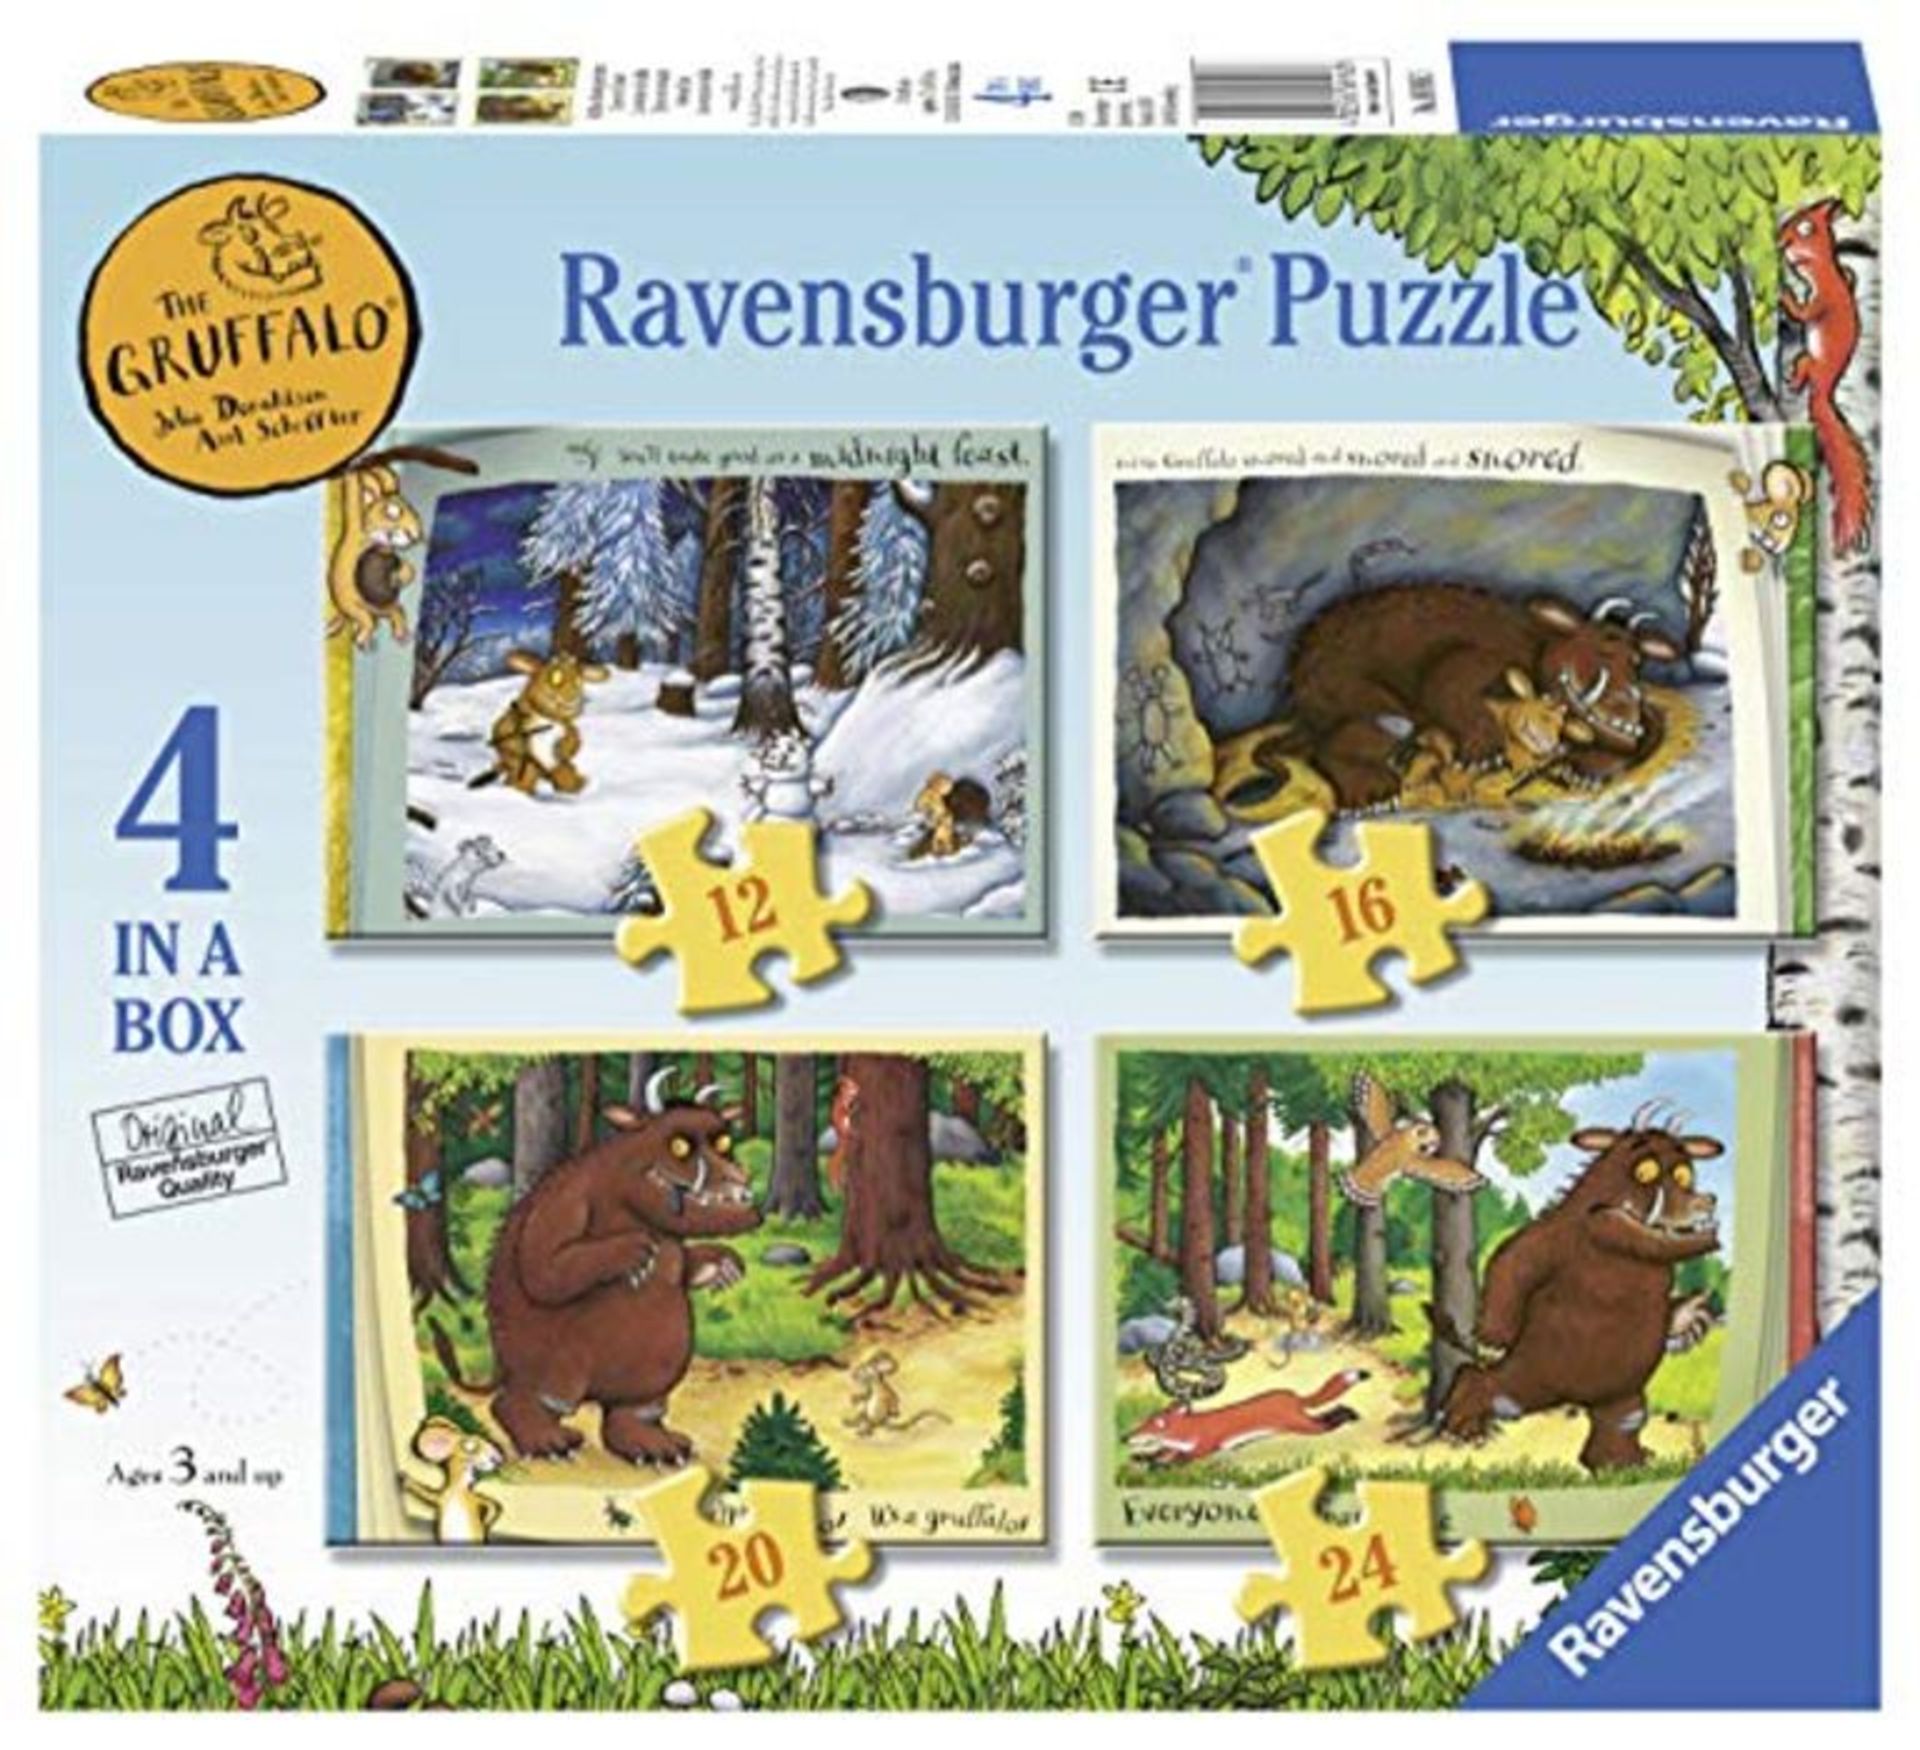 Ravensburger The Gruffalo 4 in Box (12, 16, 20, 24 Pieces) Jigsaw Puzzles for Kids Age